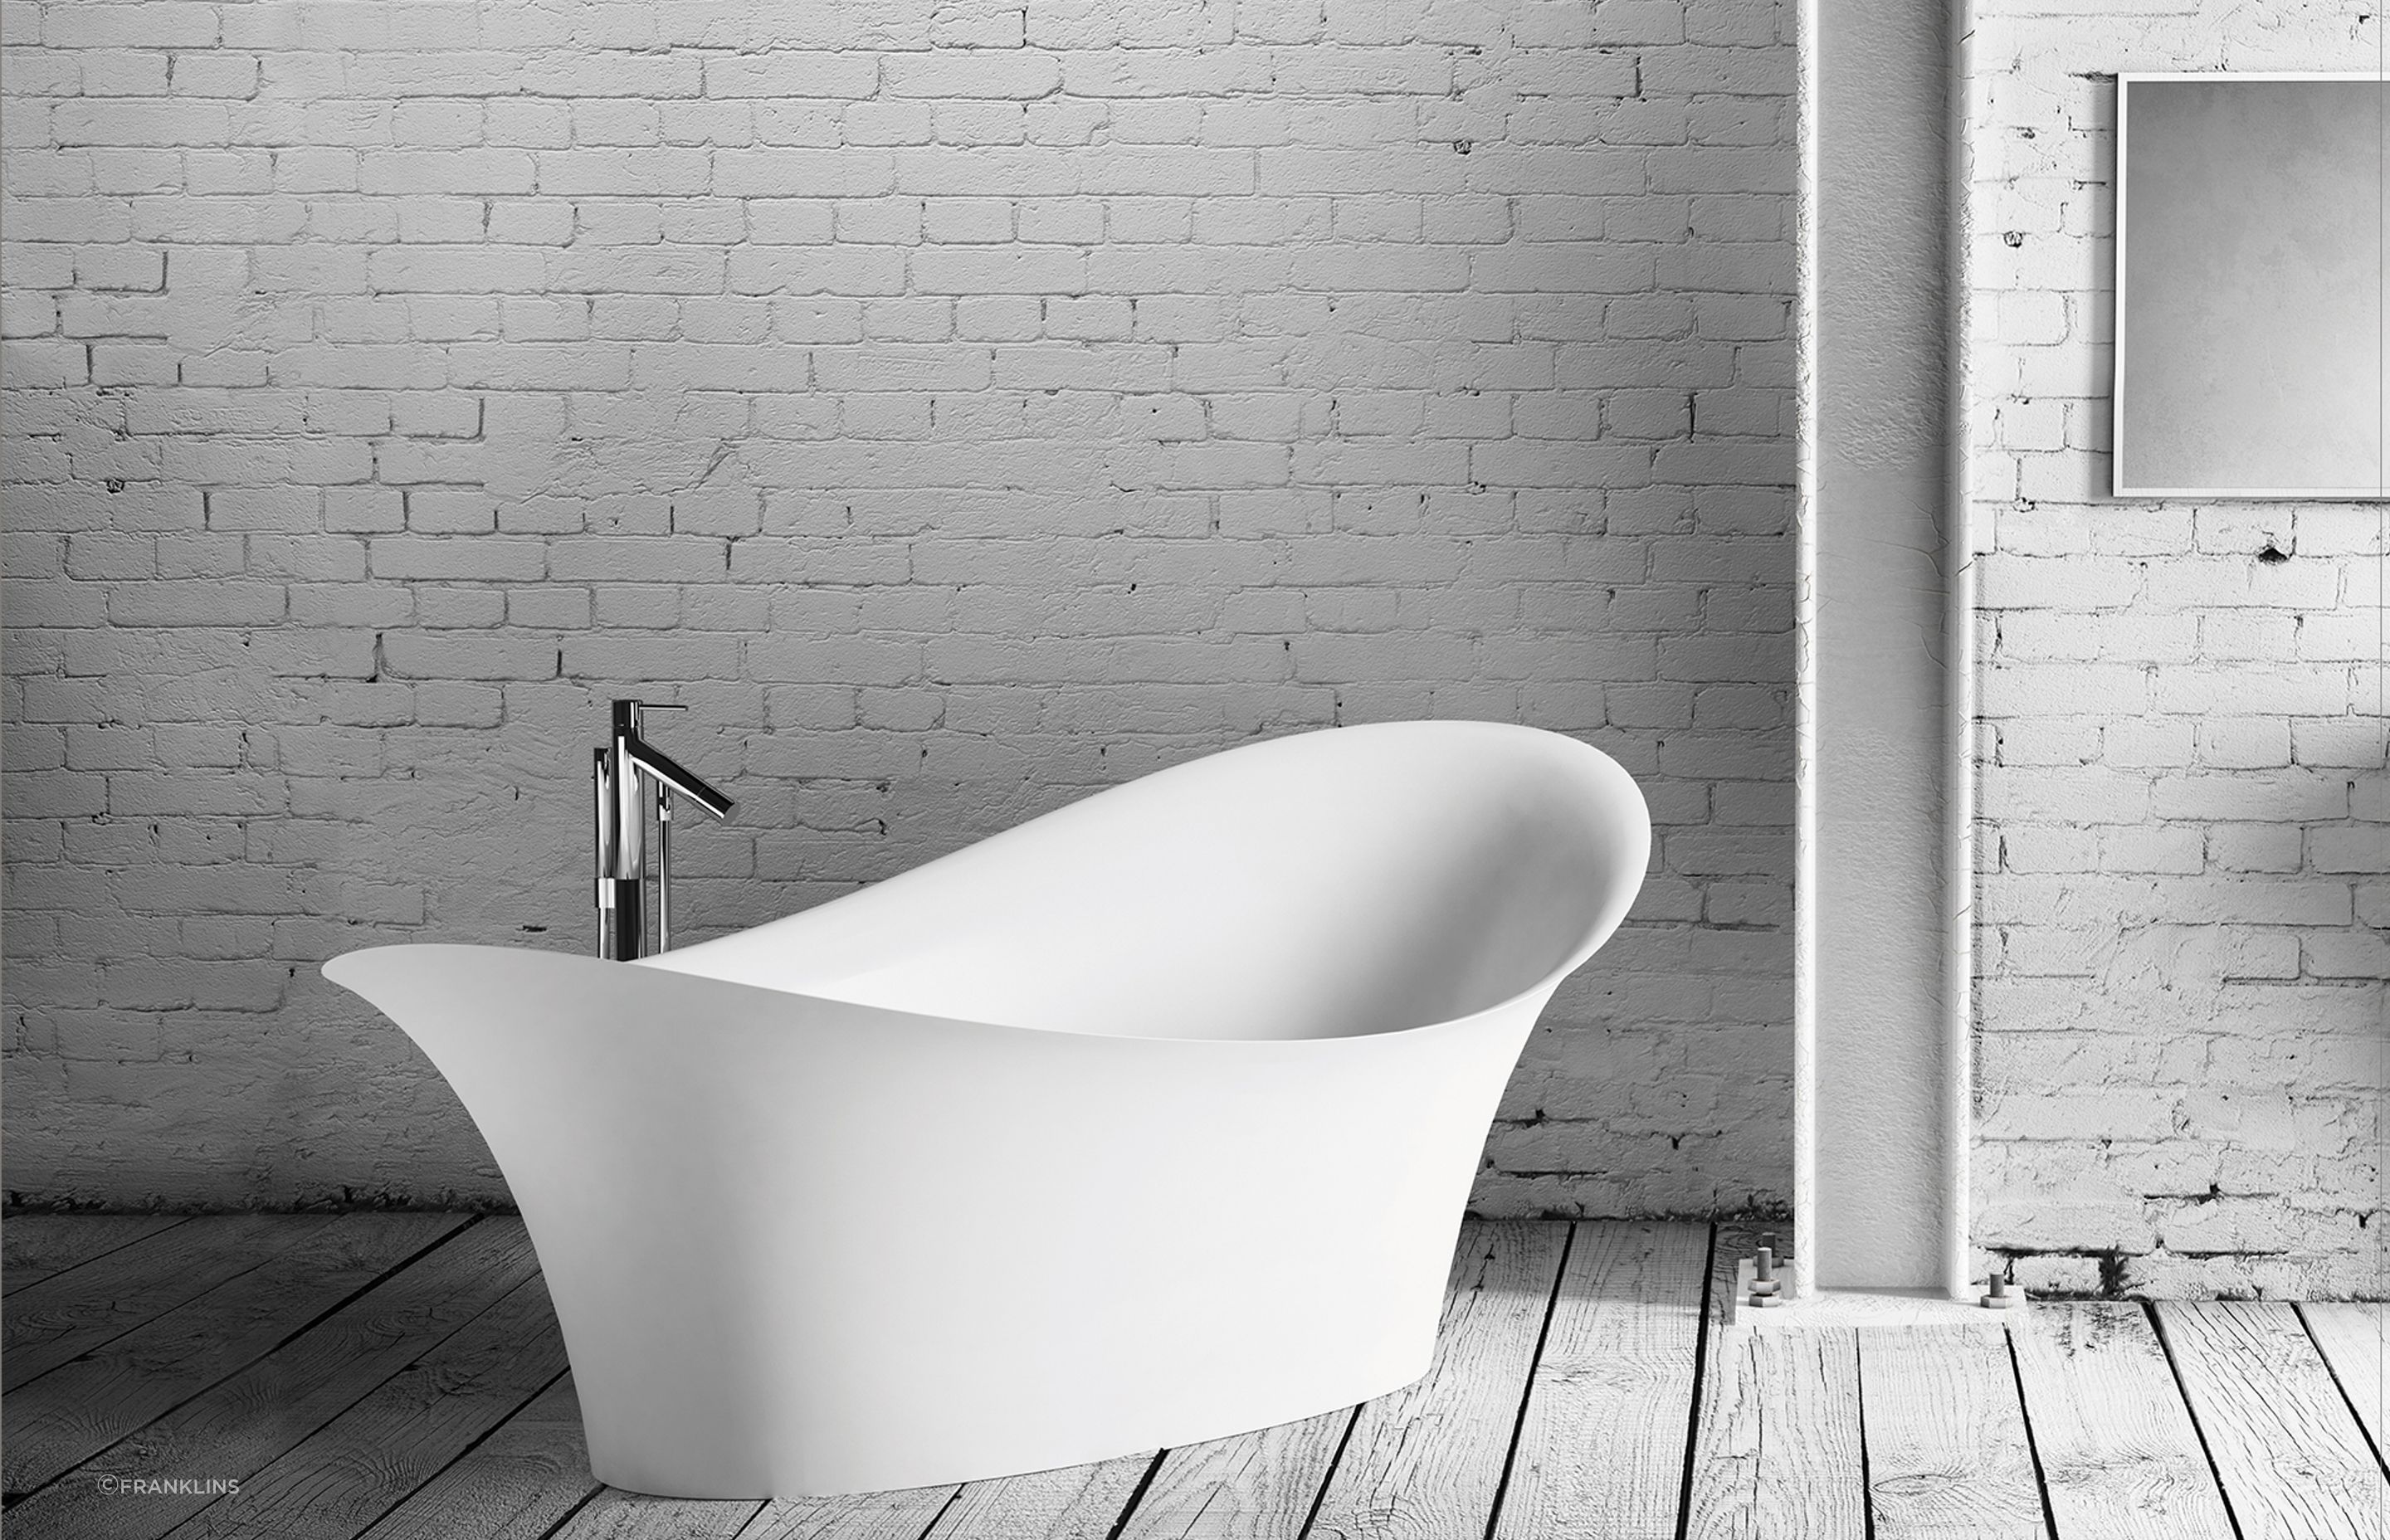 The sculptural curvaceous forms of the Marmorin Alice Freestanding Bath for an indulgent bathroom design